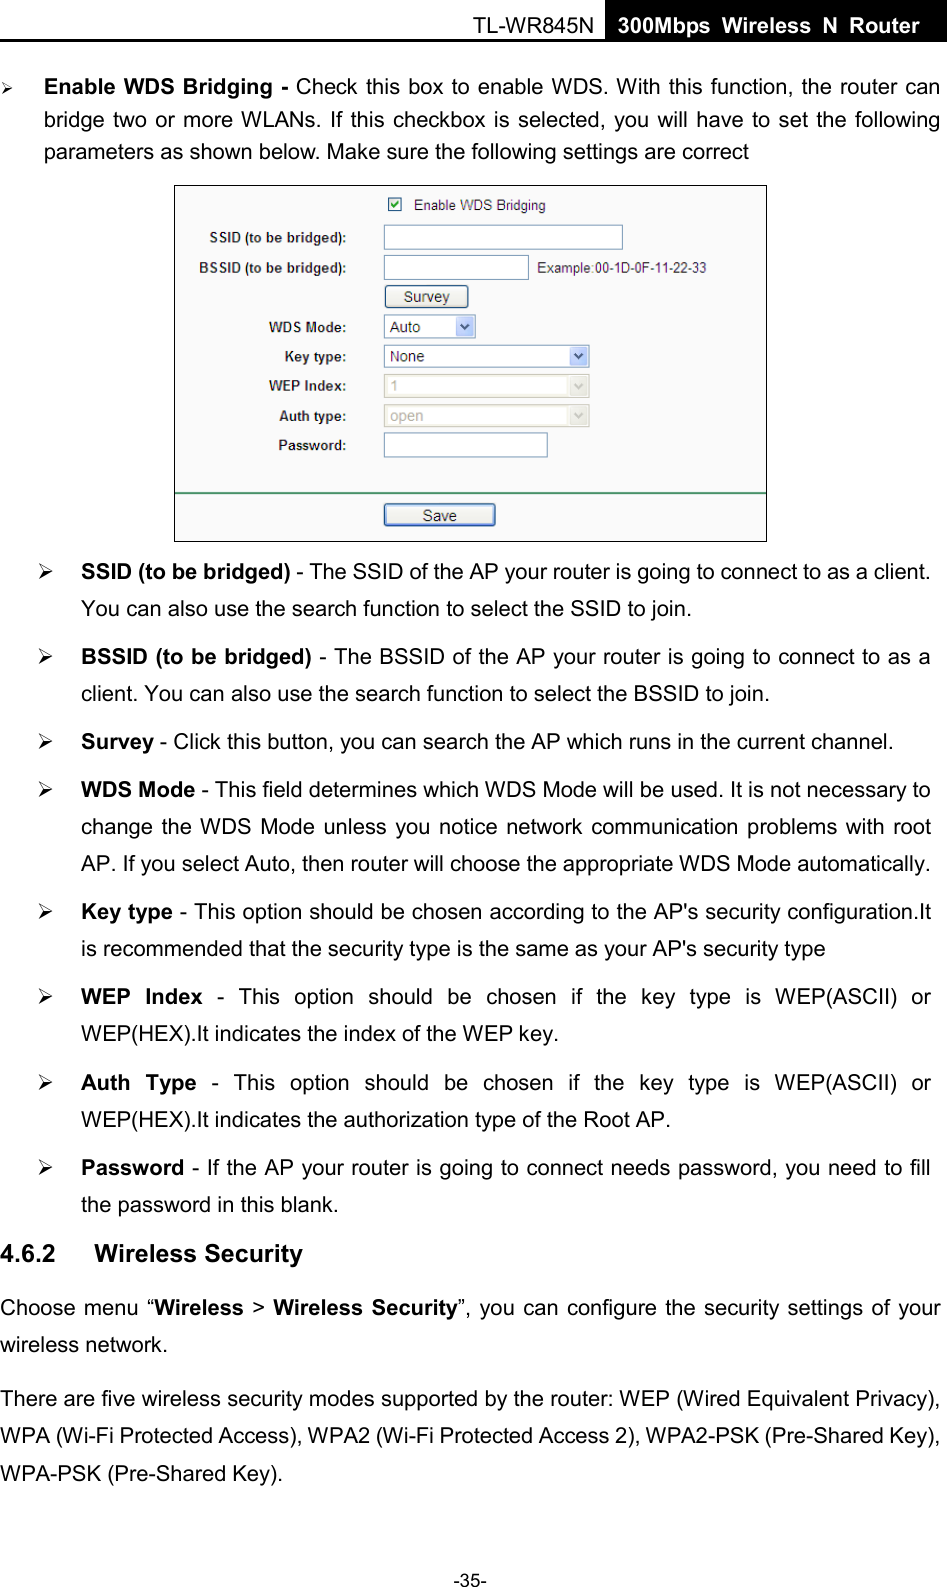  TL-WR845N  300Mbps Wireless N Router     Enable WDS Bridging - Check this box to enable WDS. With this function, the router can bridge two or more WLANs. If this checkbox is selected, you will have to set the following parameters as shown below. Make sure the following settings are correct     SSID (to be bridged) - The SSID of the AP your router is going to connect to as a client. You can also use the search function to select the SSID to join.  BSSID (to be bridged) - The BSSID of the AP your router is going to connect to as a client. You can also use the search function to select the BSSID to join.  Survey - Click this button, you can search the AP which runs in the current channel.  WDS Mode - This field determines which WDS Mode will be used. It is not necessary to change the WDS Mode unless you notice network communication problems with root AP. If you select Auto, then router will choose the appropriate WDS Mode automatically.  Key type - This option should be chosen according to the AP&apos;s security configuration.It is recommended that the security type is the same as your AP&apos;s security type  WEP Index - This option should be chosen if the key type is WEP(ASCII) or WEP(HEX).It indicates the index of the WEP key.  Auth Type - This option should be chosen if the key type is WEP(ASCII) or WEP(HEX).It indicates the authorization type of the Root AP.  Password - If the AP your router is going to connect needs password, you need to fill the password in this blank. 4.6.2 Wireless Security Choose menu “Wireless &gt; Wireless Security”, you can configure the security settings of your wireless network. There are five wireless security modes supported by the router: WEP (Wired Equivalent Privacy), WPA (Wi-Fi Protected Access), WPA2 (Wi-Fi Protected Access 2), WPA2-PSK (Pre-Shared Key), WPA-PSK (Pre-Shared Key). -35- 